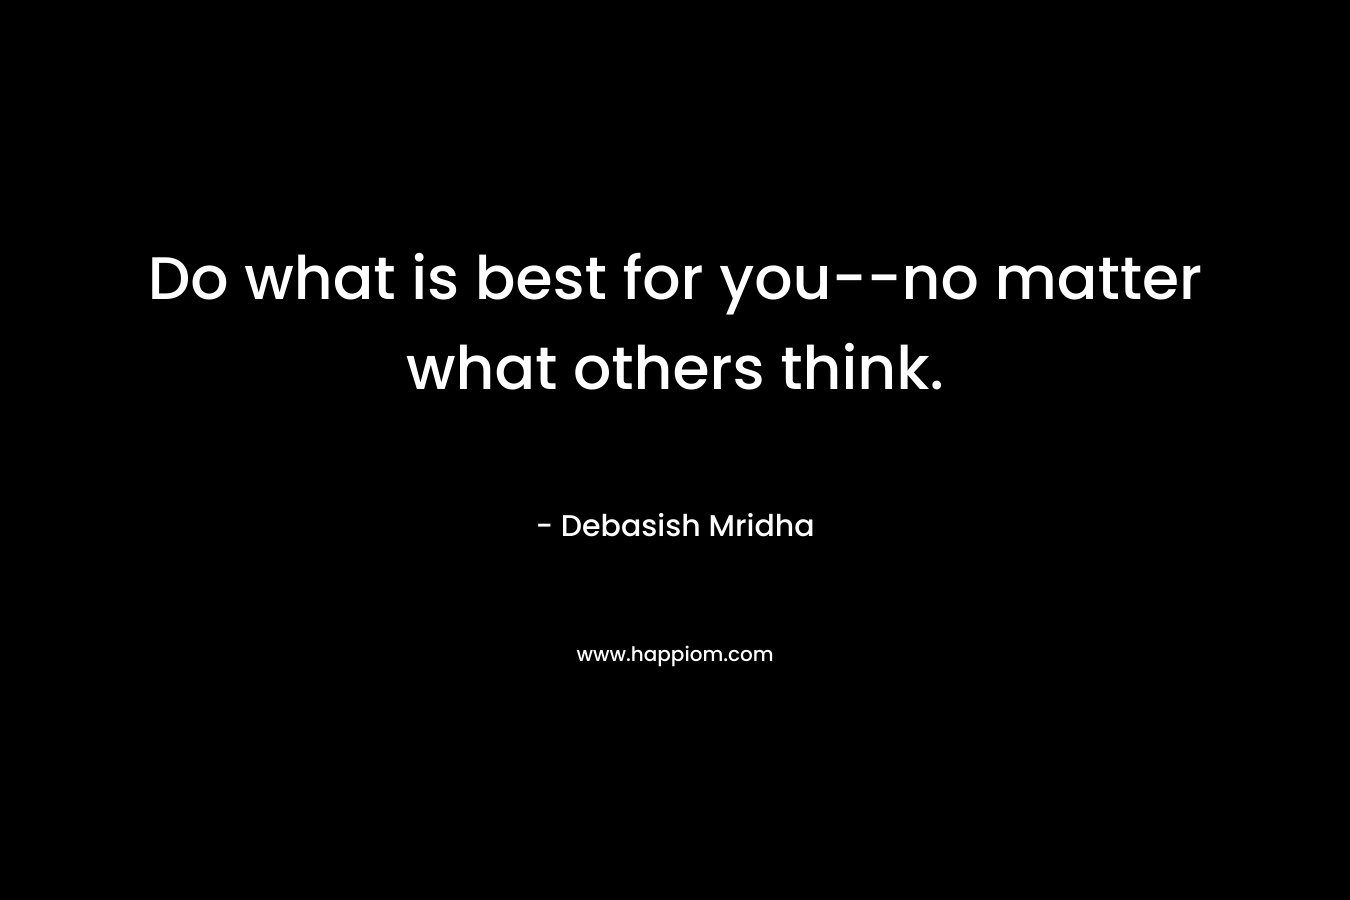 Do what is best for you--no matter what others think.